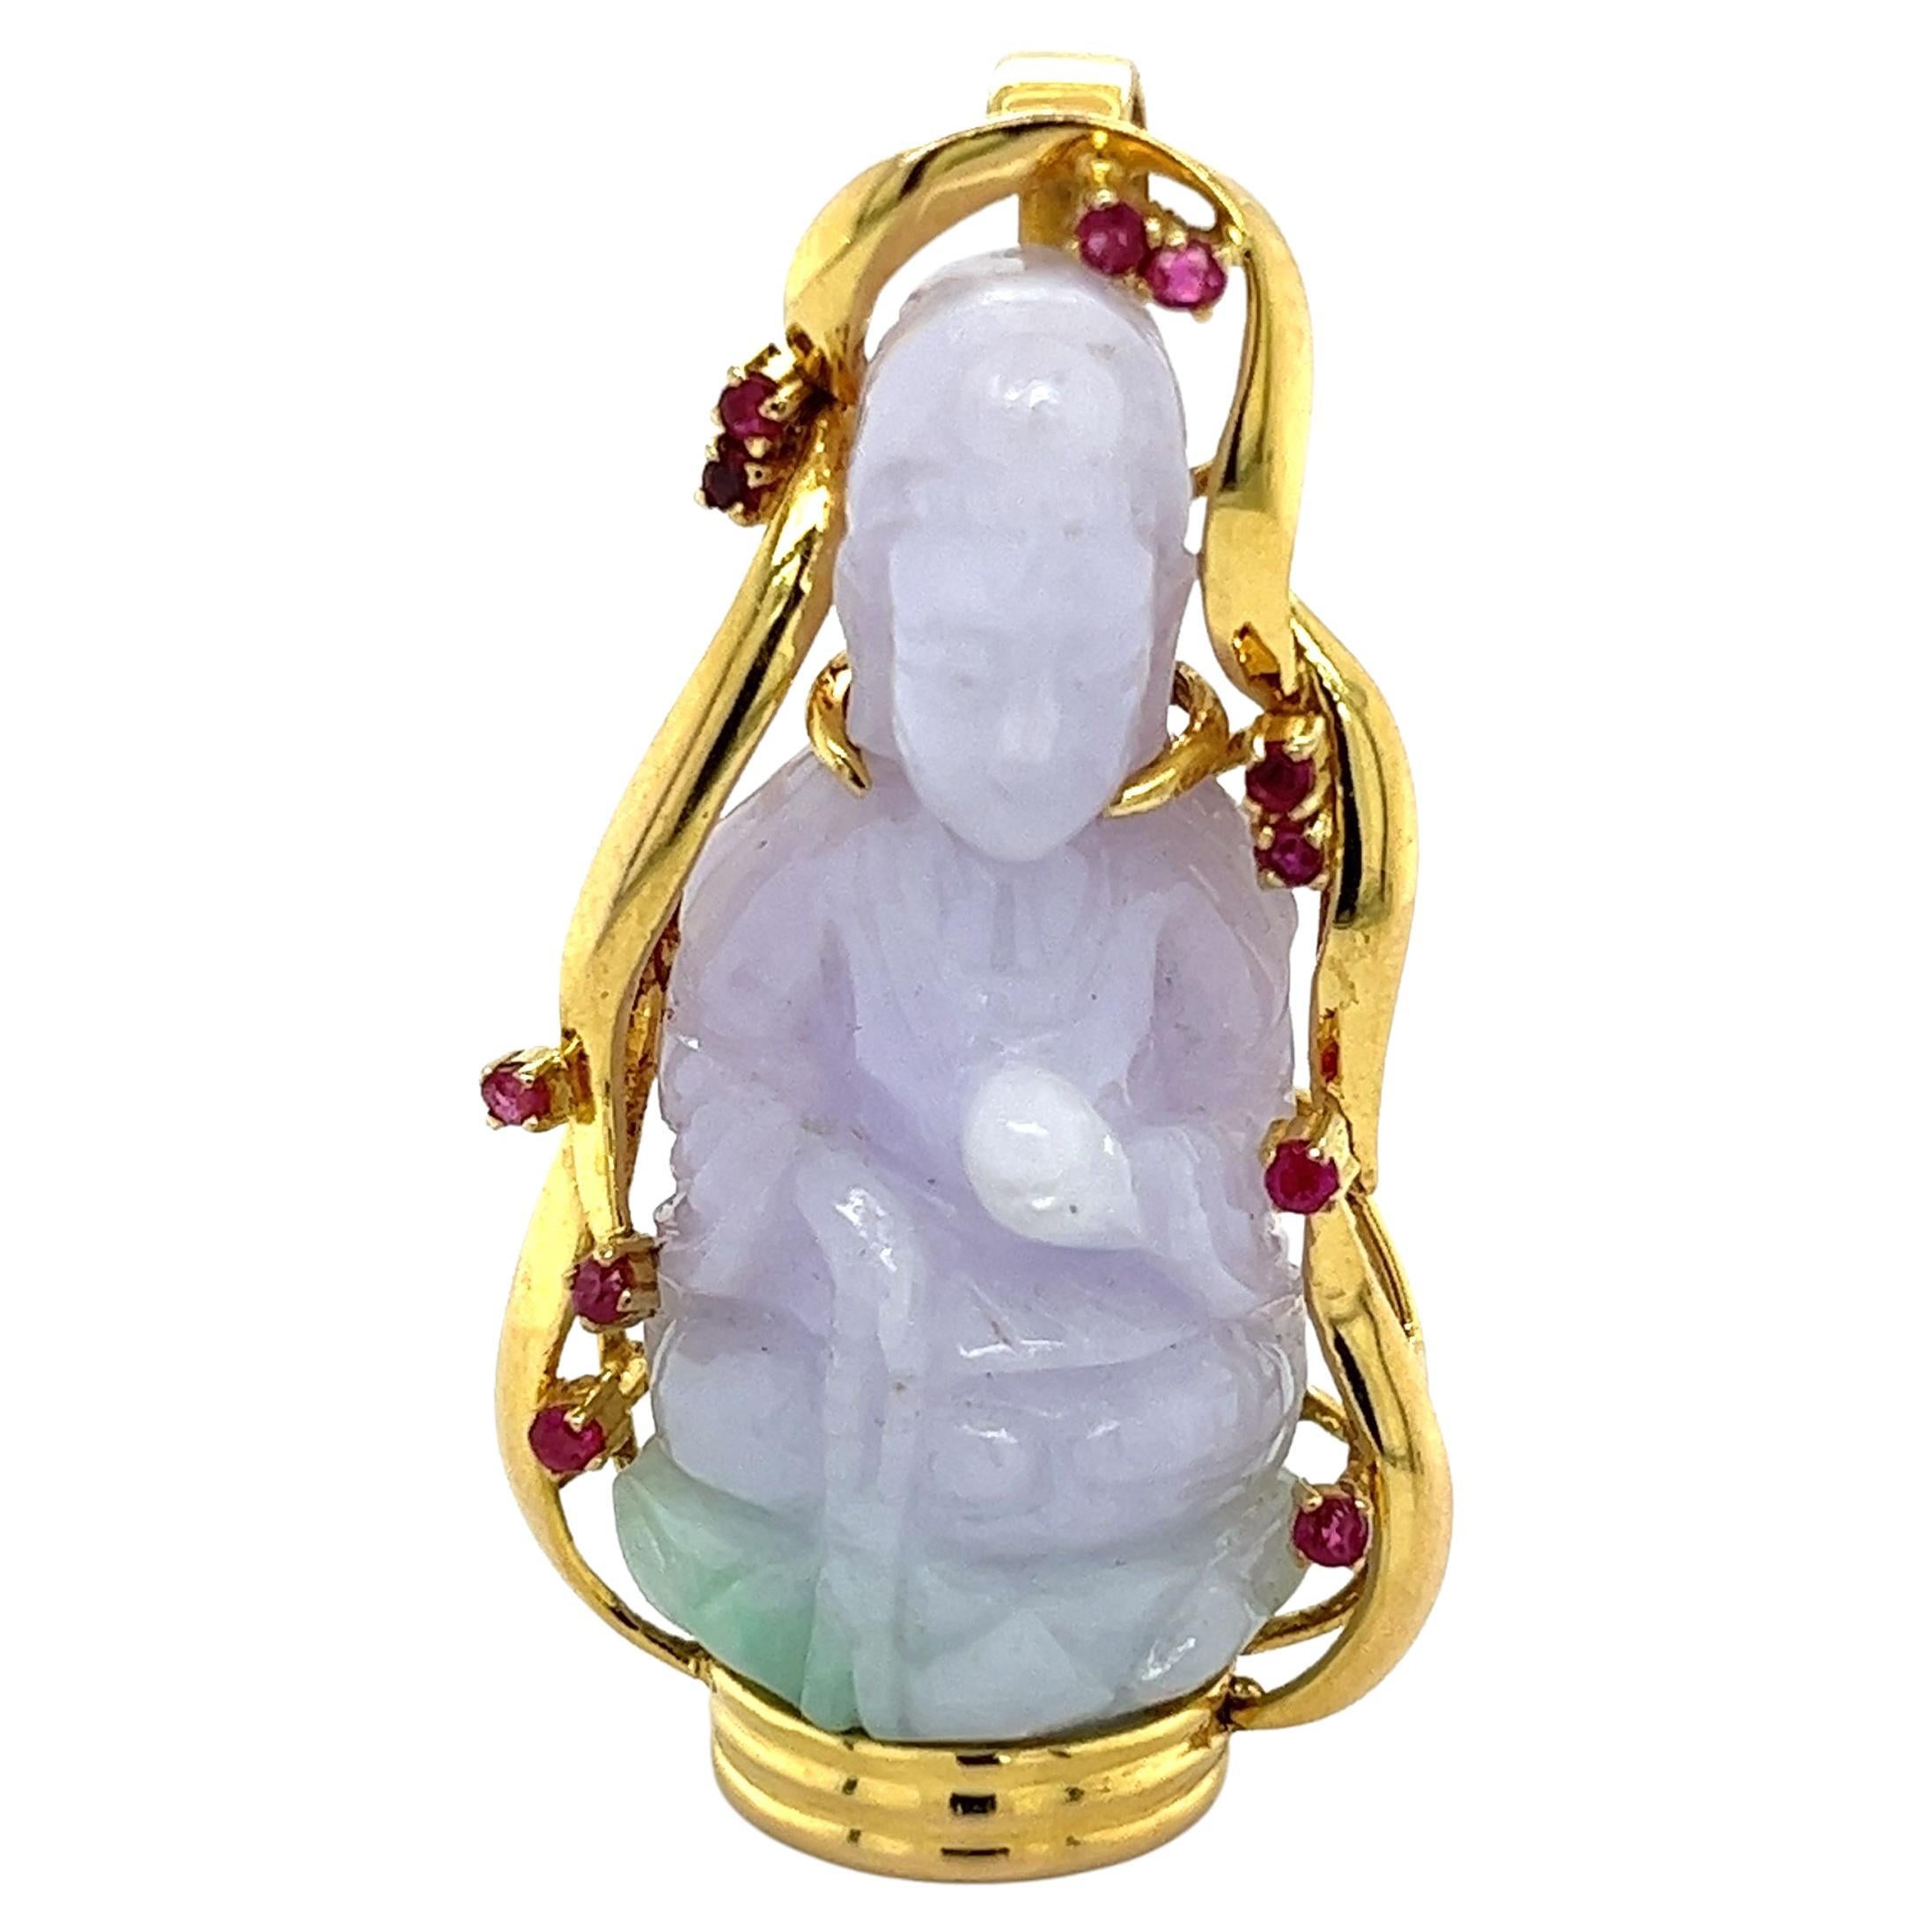 Vintage 14k Yellow Gold Carved Lavender Jade Buddha Pendant Necklacee For Sale